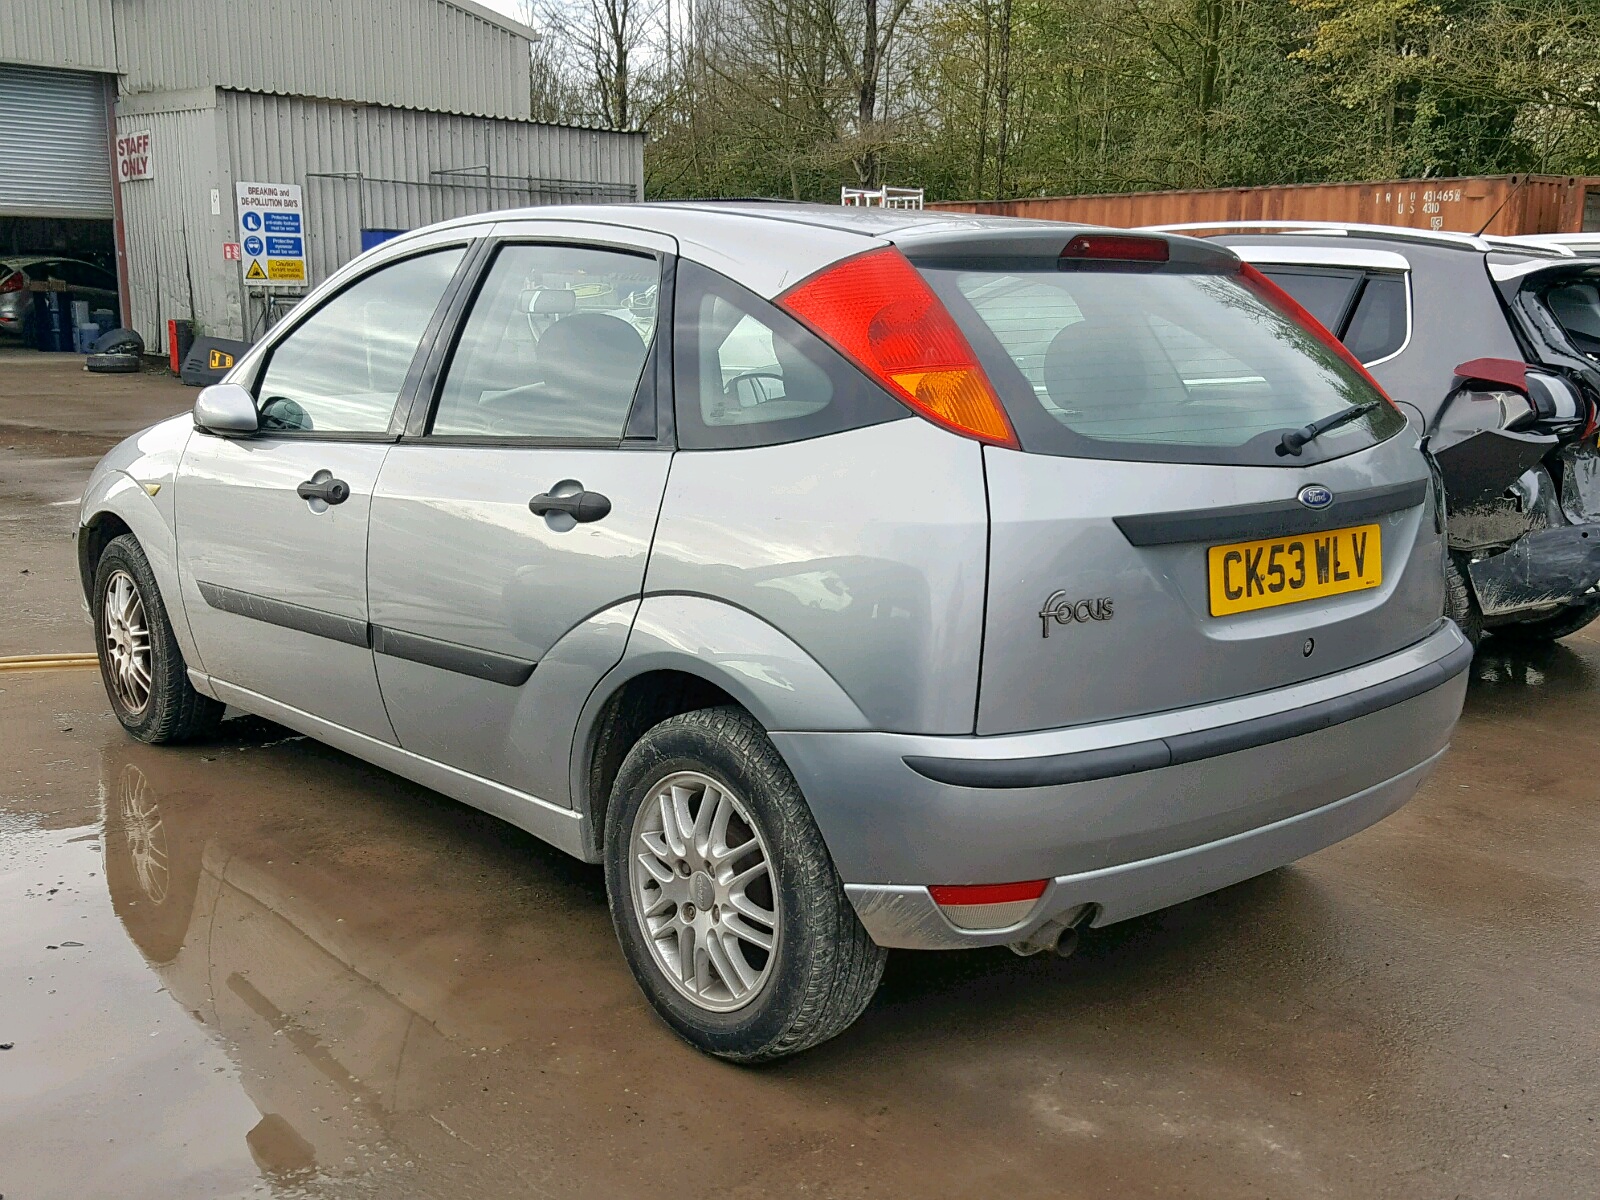 2003 Ford Focus Lx For Sale At Copart Uk Salvage Car Auctions